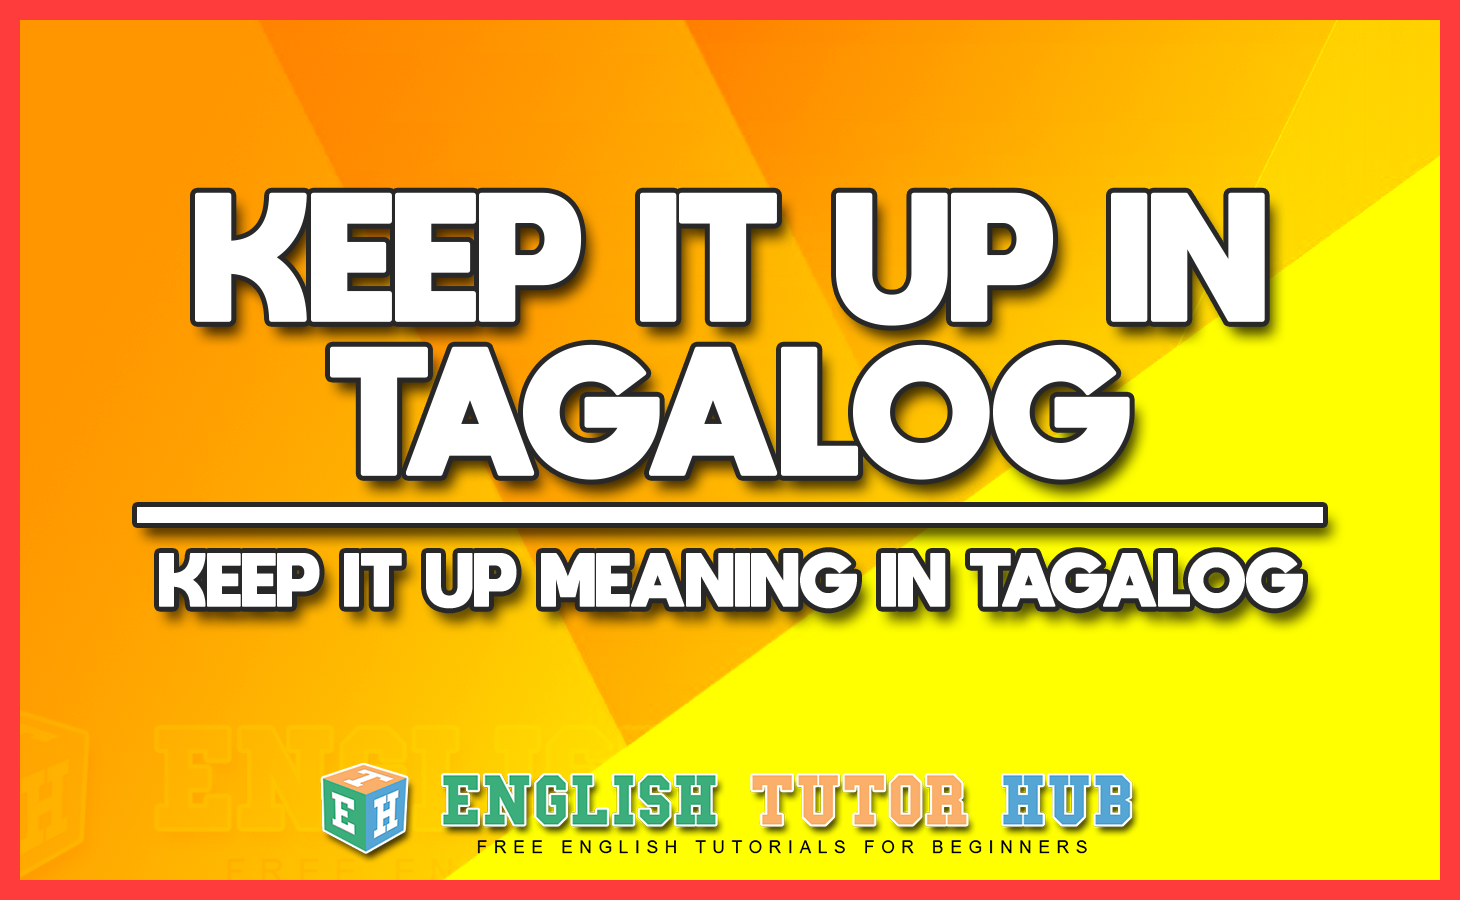 KEEP IT UP IN TAGALOG - KEEP IT UP MEANING IN TAGALOG